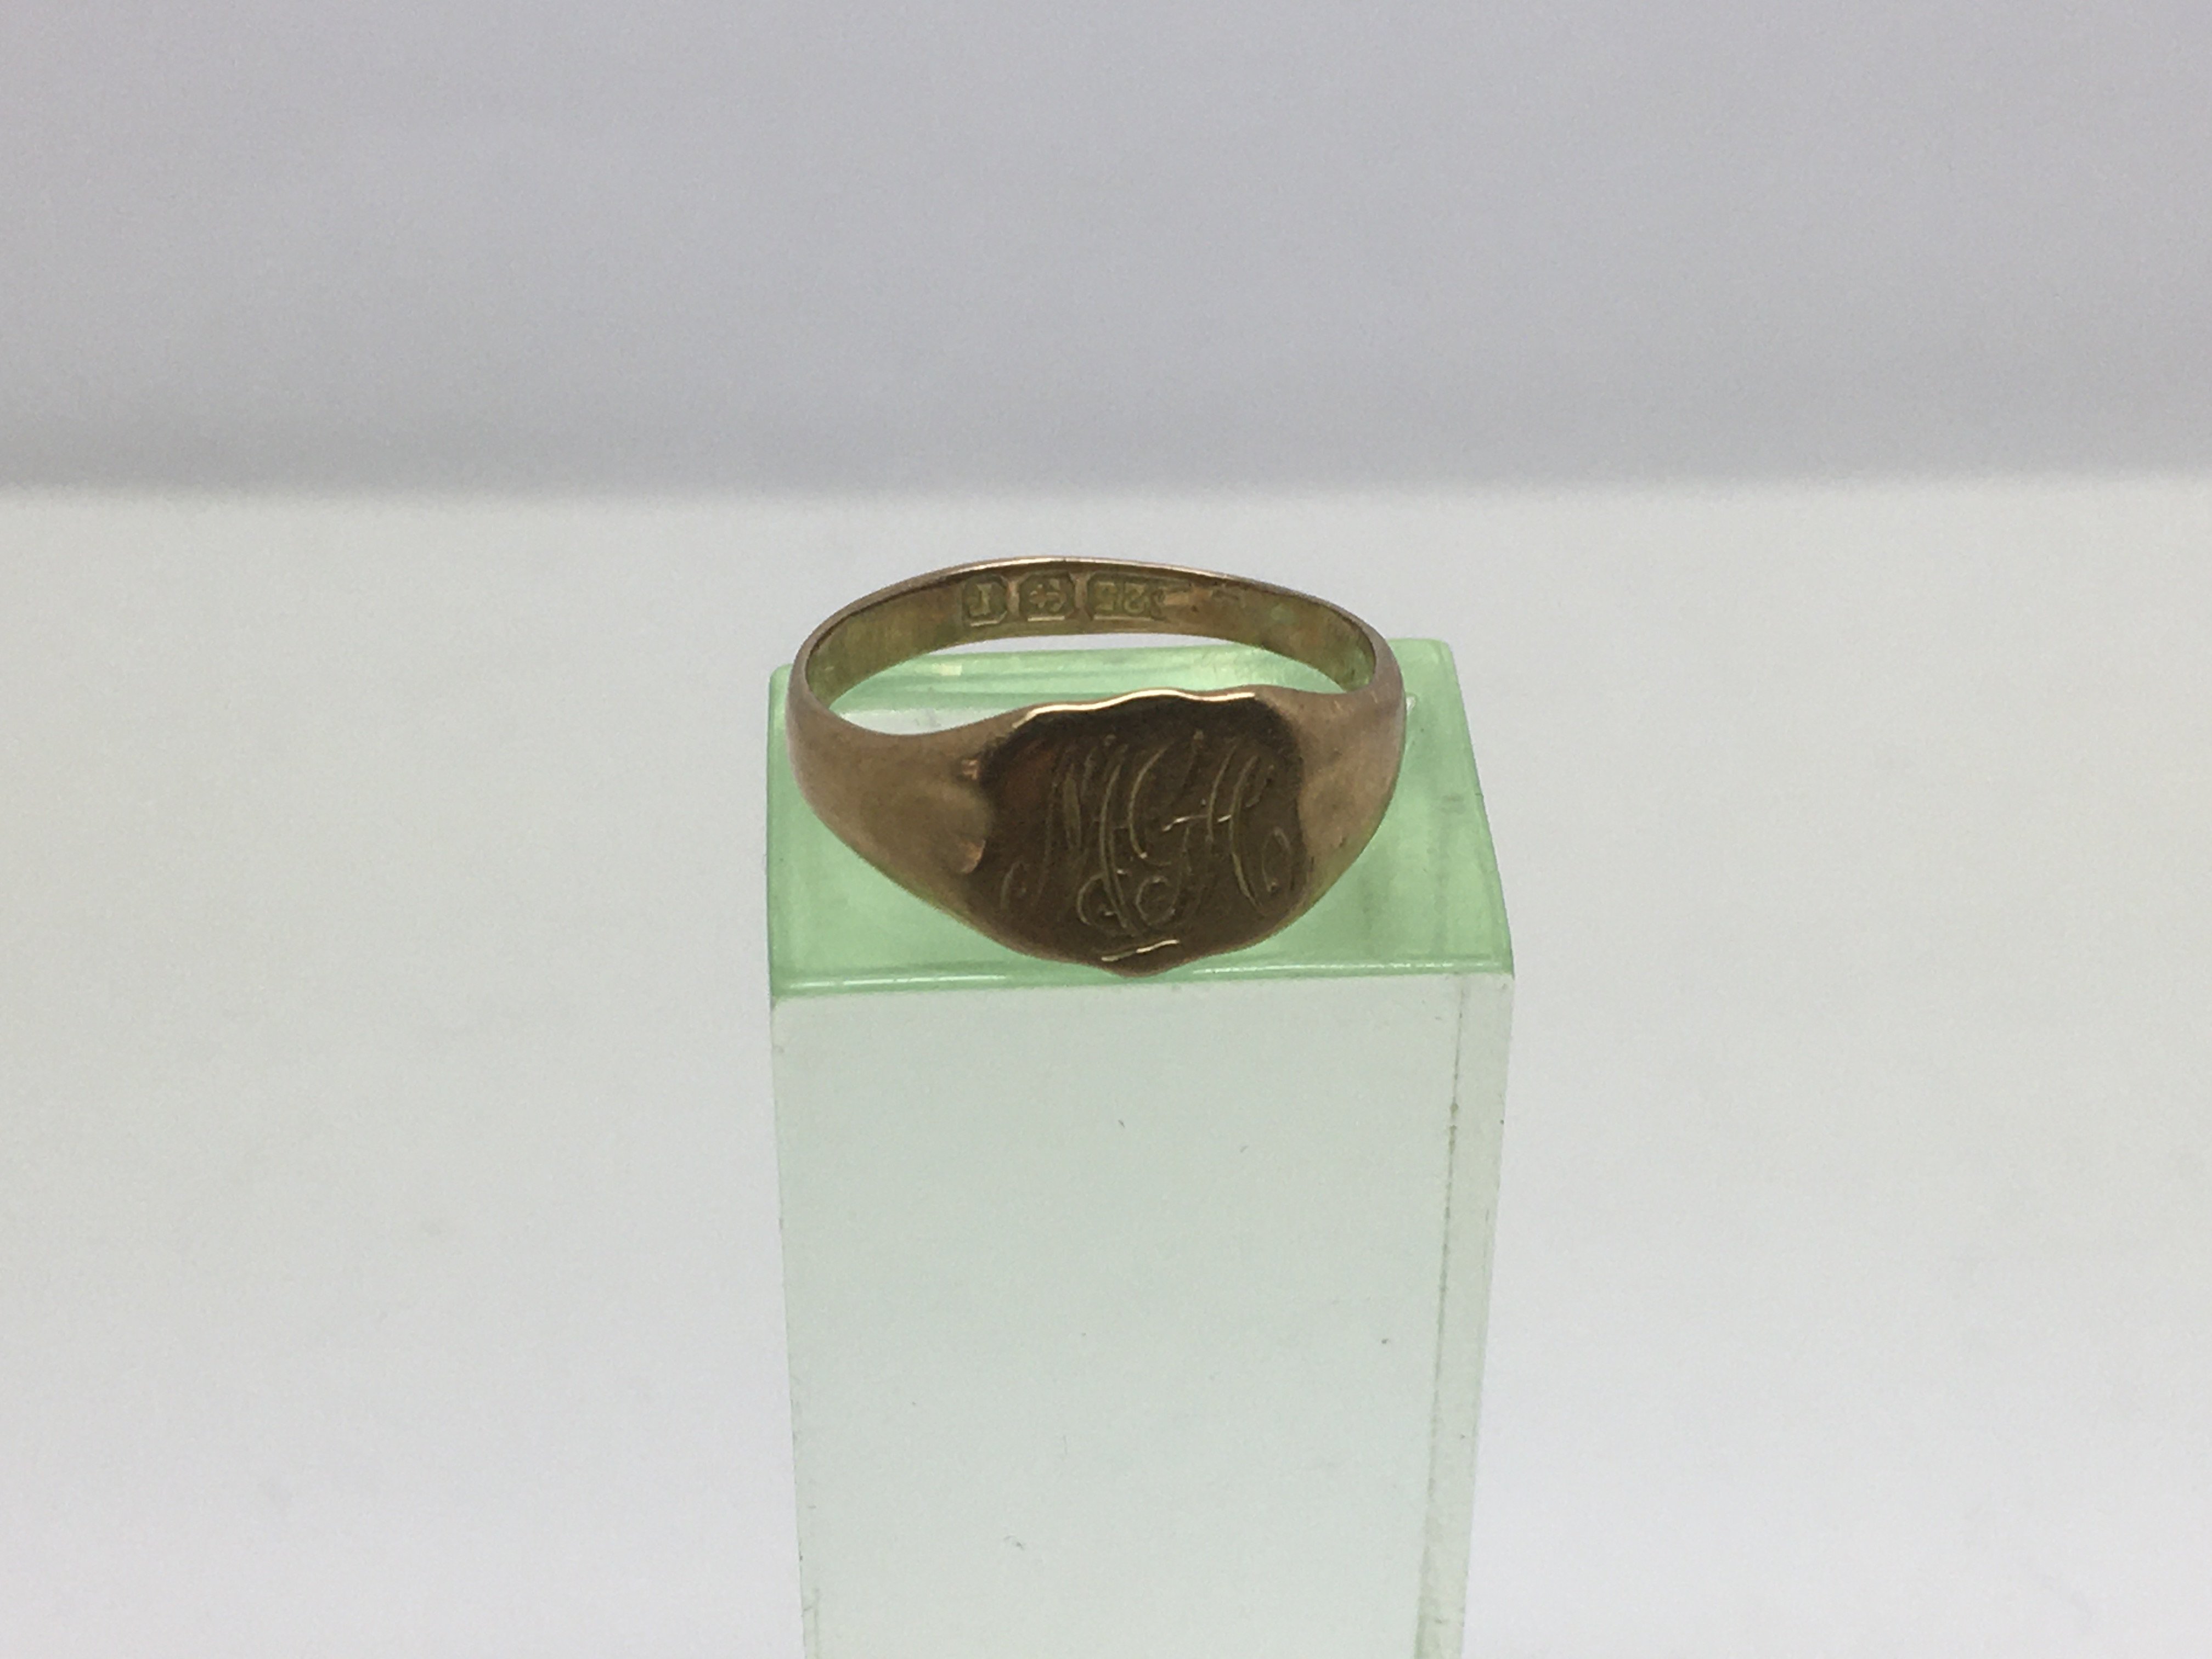 A 15ct gold ring dated 1921, approx 1.8g and appro